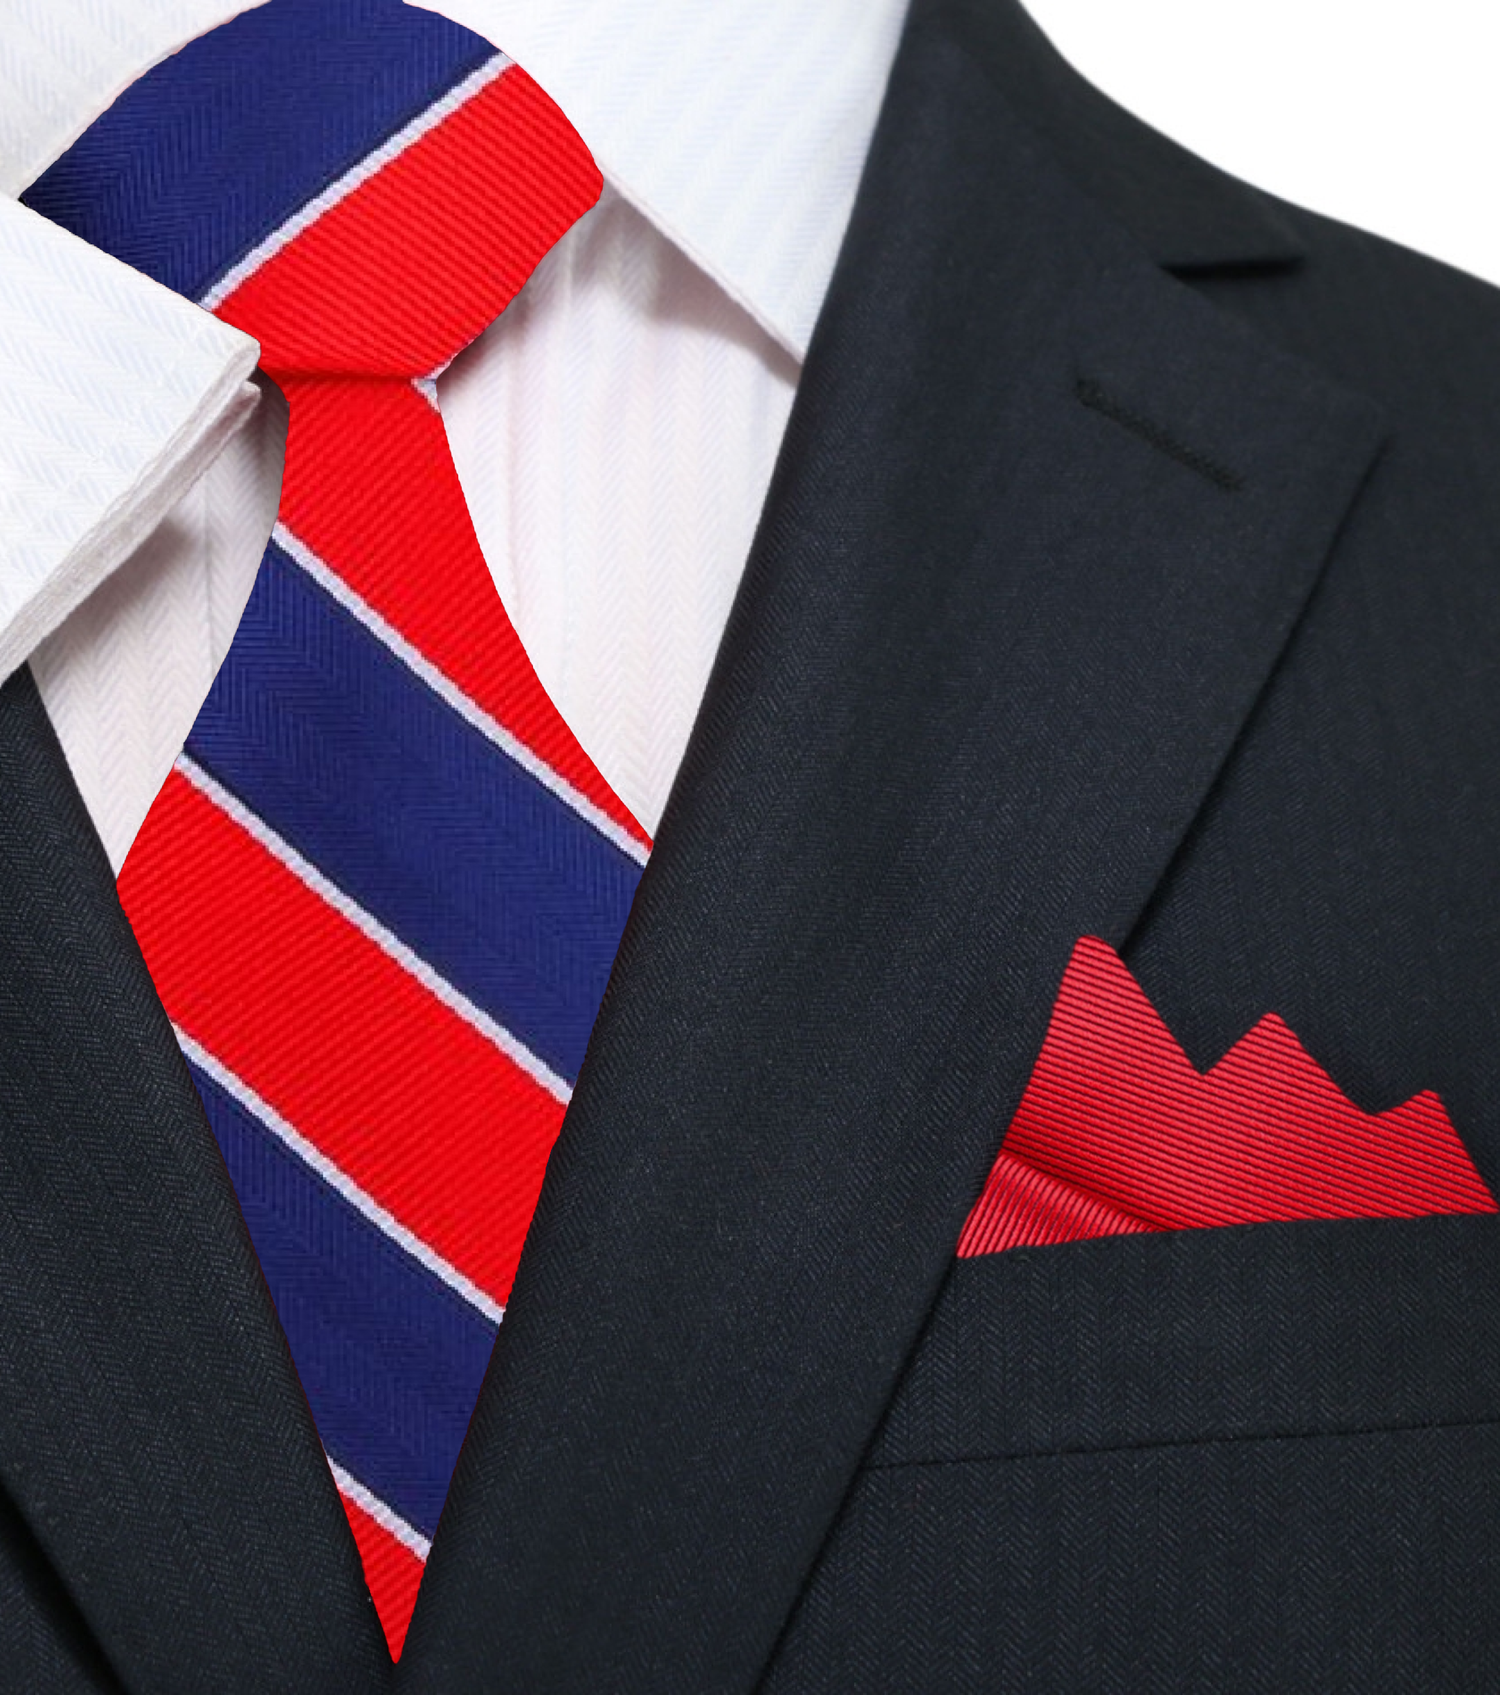 Main View: Red, White, Blue Stripe Tie and Red Pocket Square